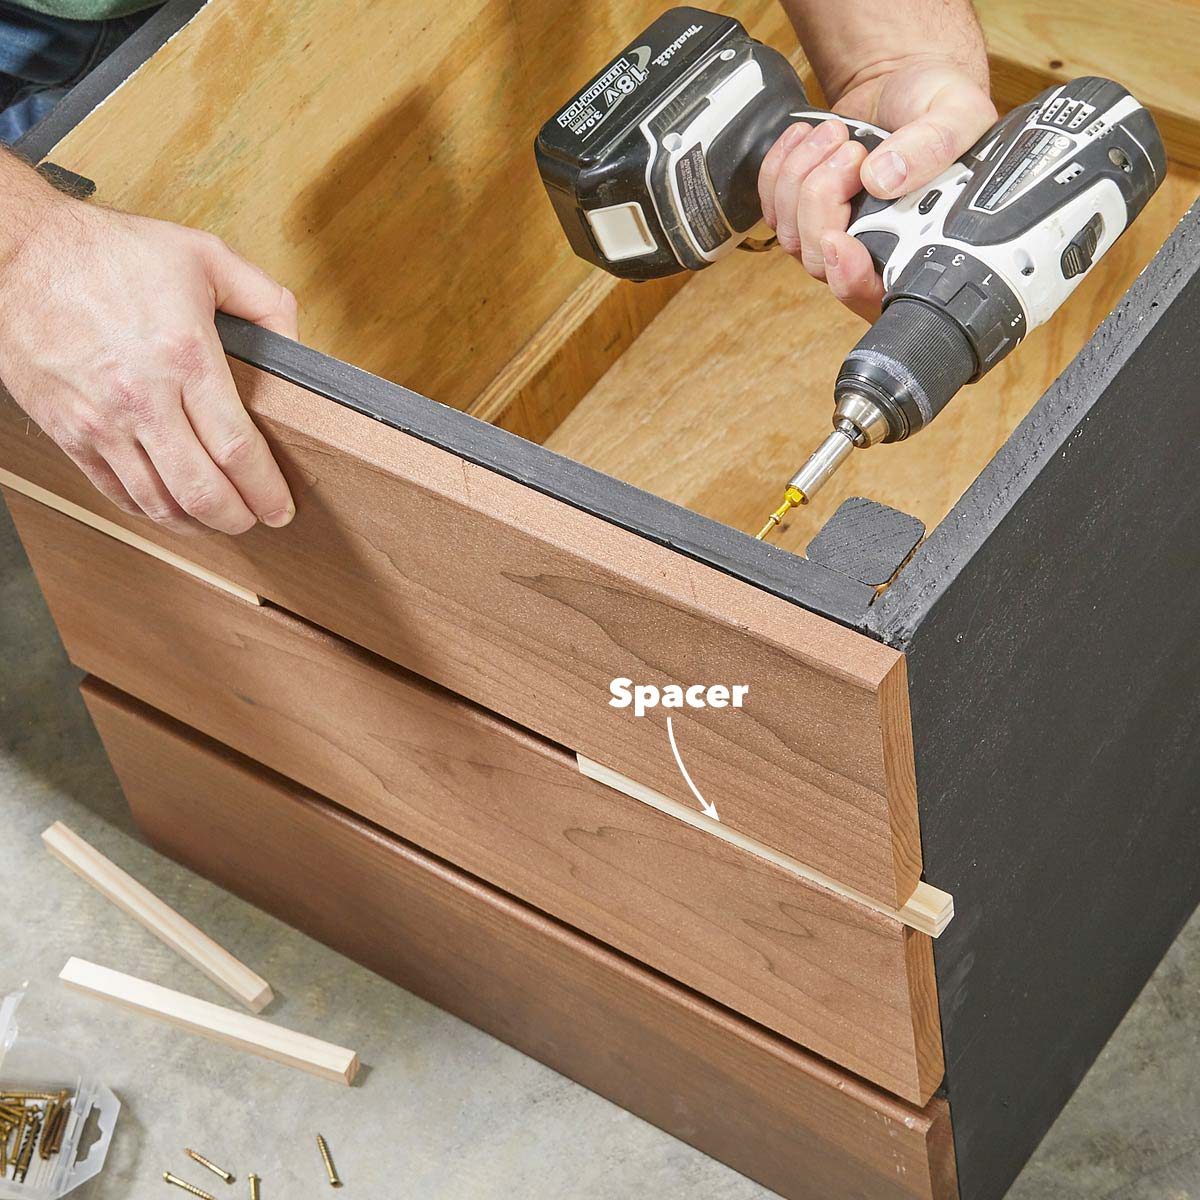 Need a hinged, waterproof, outdoor-capable box to build a DIY